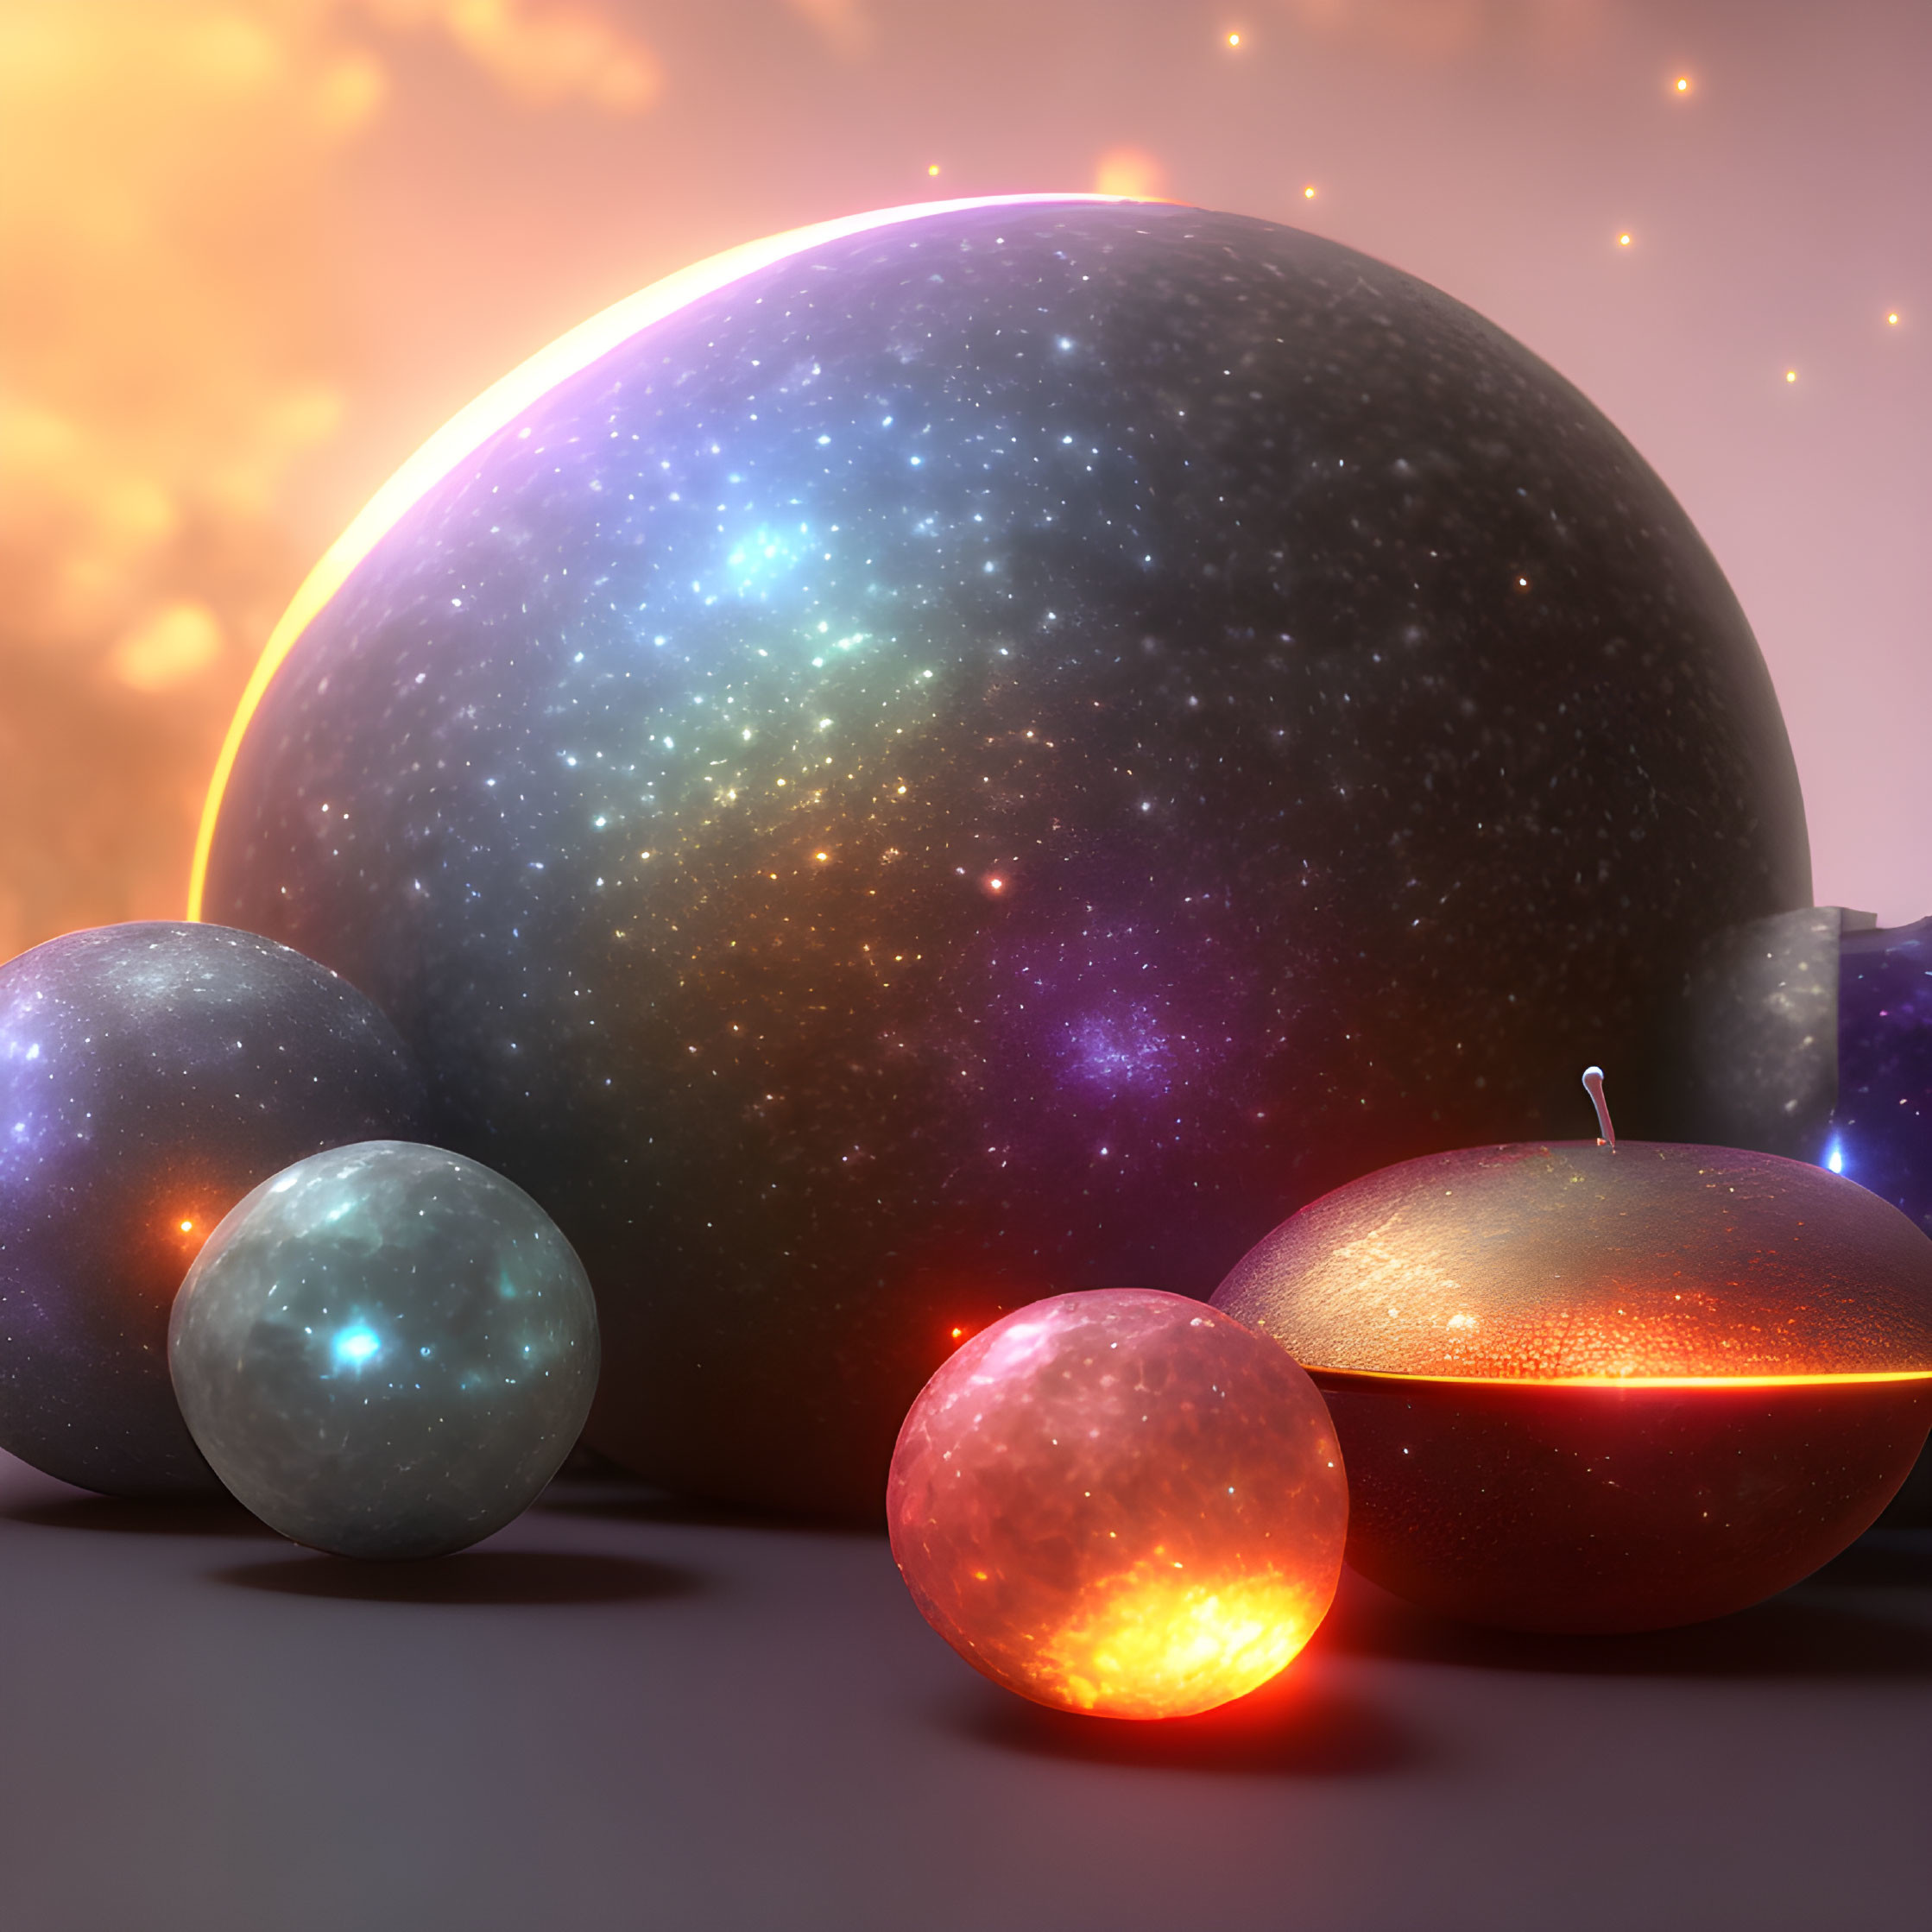 Cosmic spherical objects with textured surfaces in warm light.